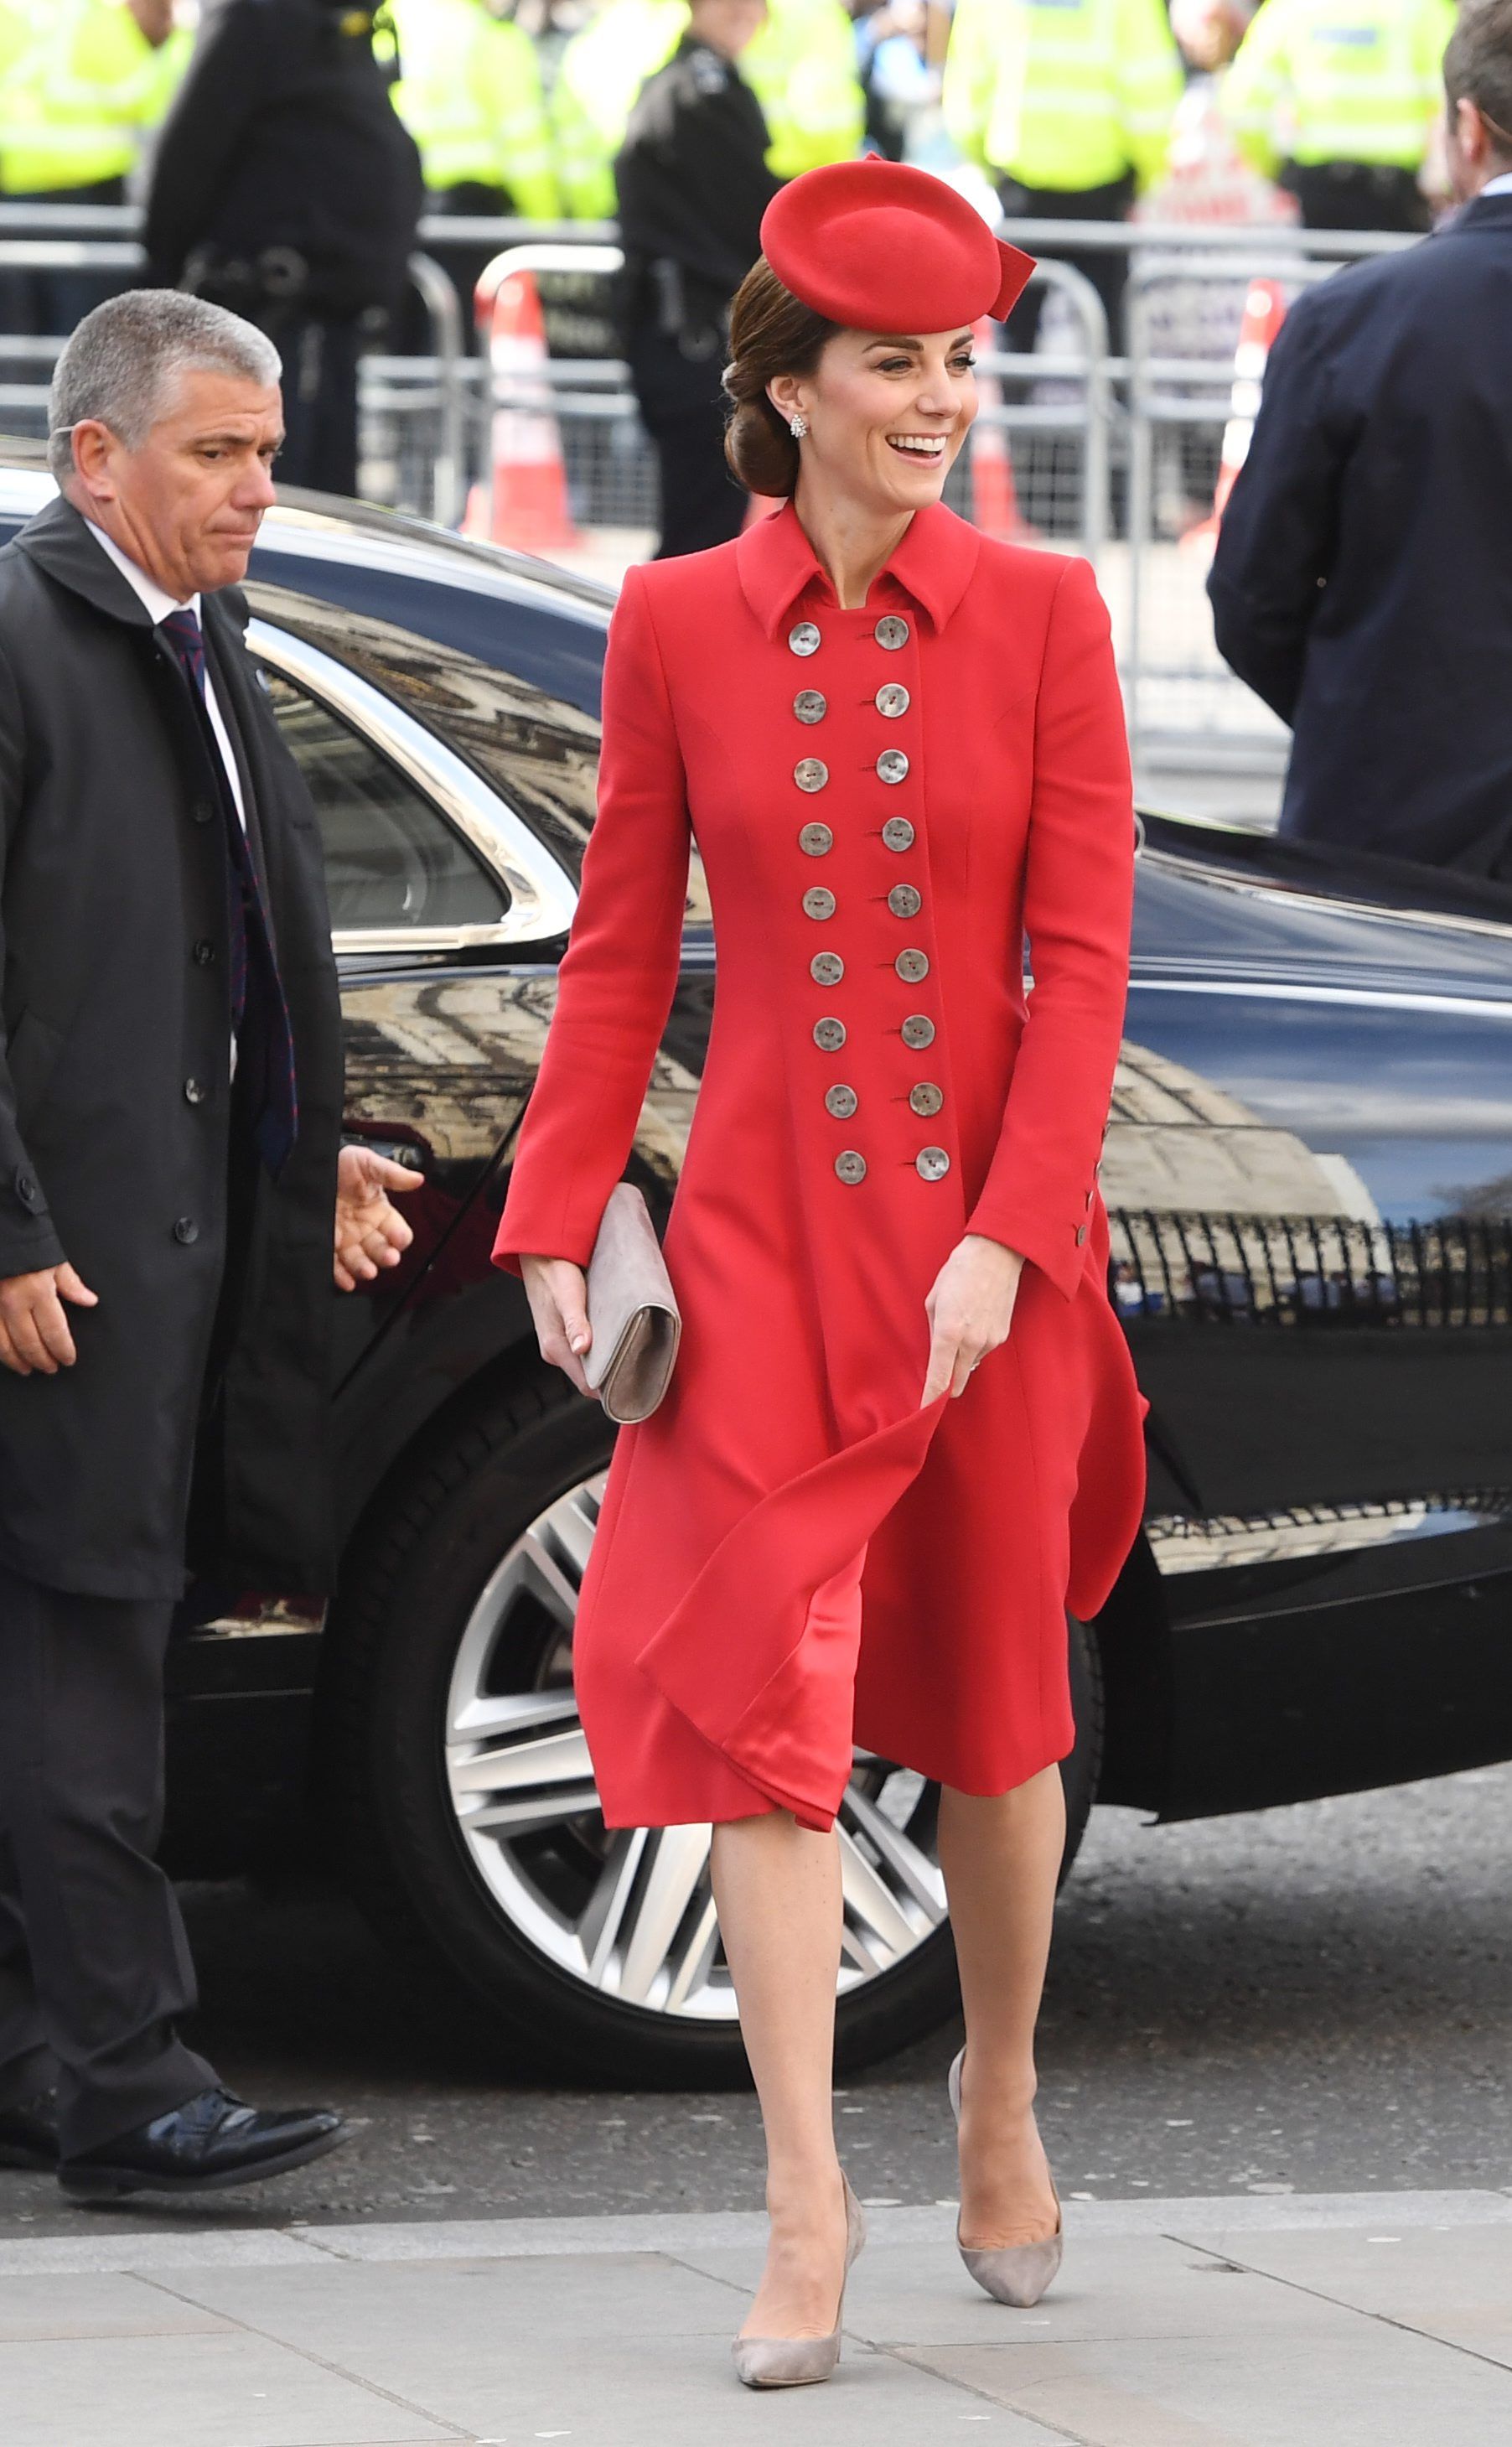 Kate Middleton Recycled This Red Ensemble For Commonwealth Day - Fame10